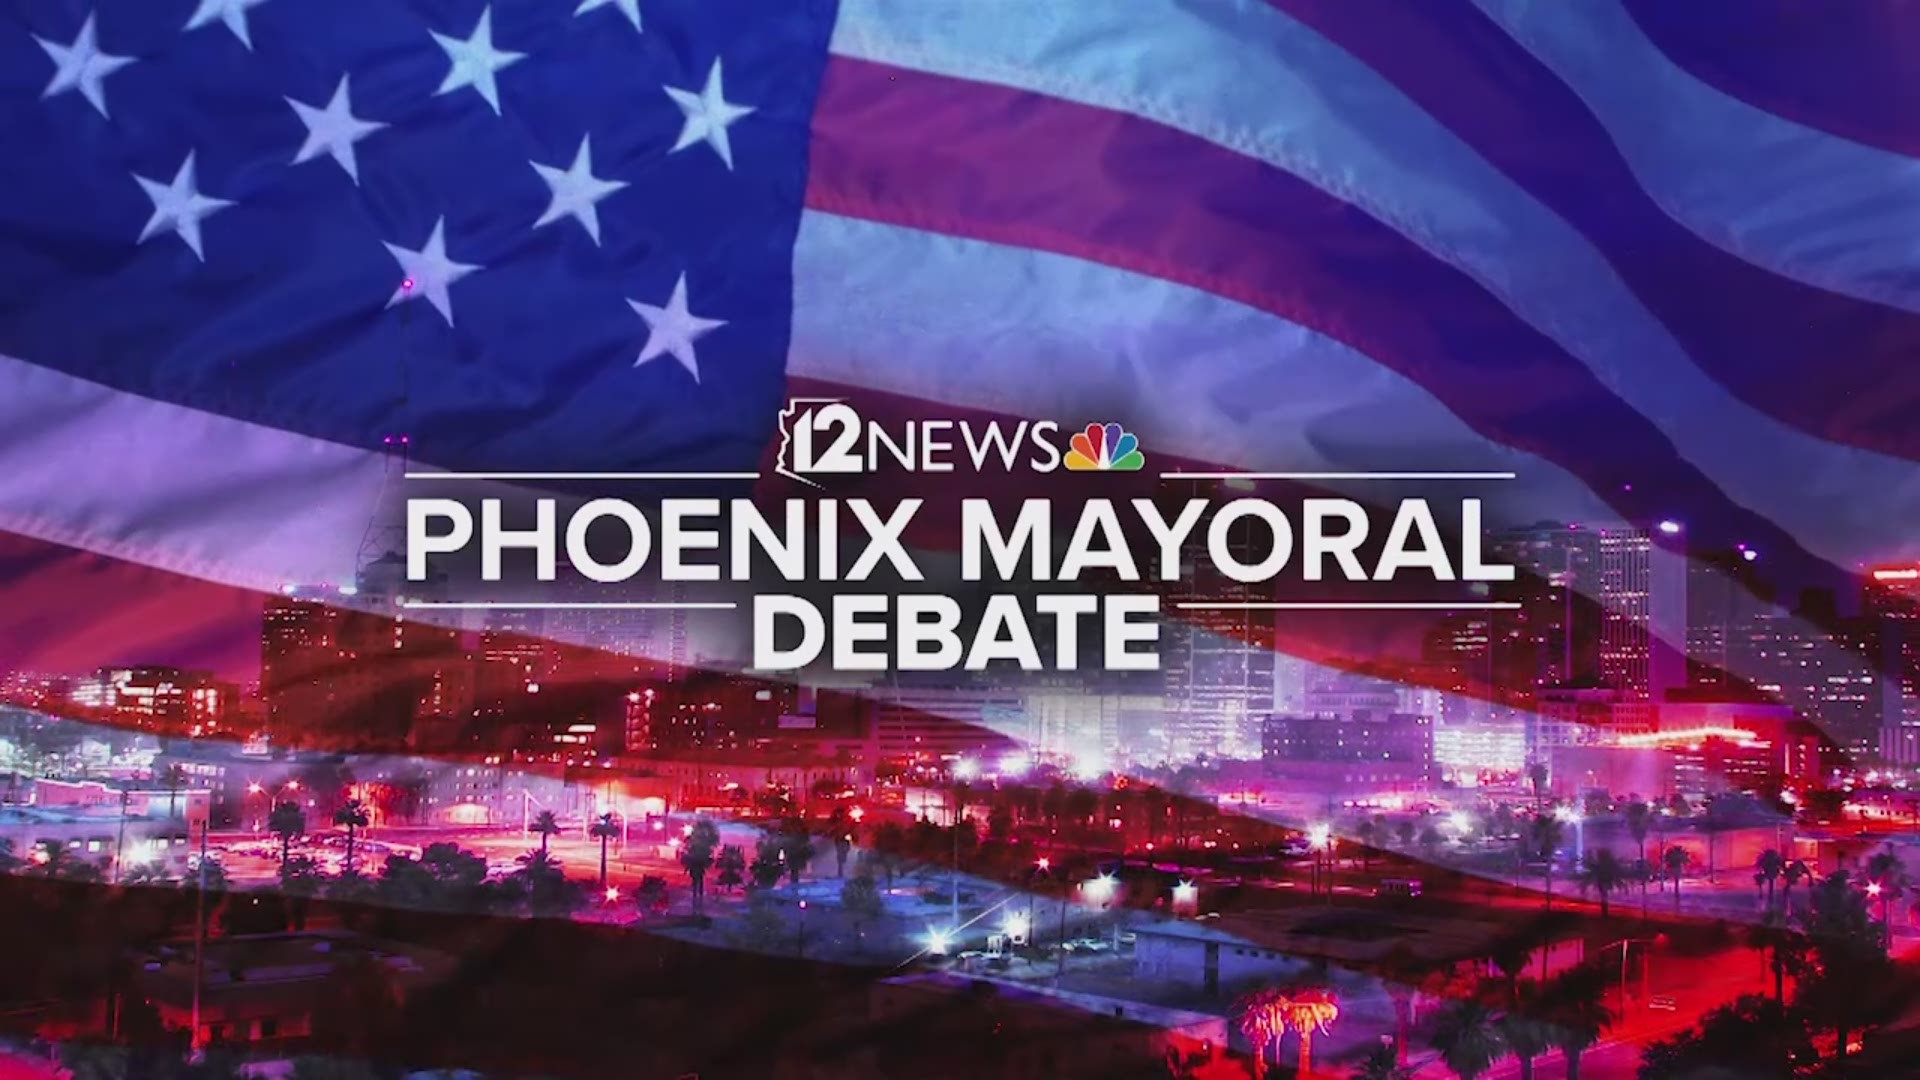 Candidates Kate Gallego and Daniel Valenzuela faced off in the 12 News Phoenix Mayoral Debate (check me on title) Friday. In an online extra, political reporter Brahm Resnik asked them their stances on Arizona's water supply and possibility of a future water shortage, whether the state should legalize recreational marijuana and one question they feel like their opponent hasn't answered. You can watch the full debate on 12 News at 6:30 p.m. on Friday, February 15 or a re-airing on Sunday, February 17 at 8 a.m.